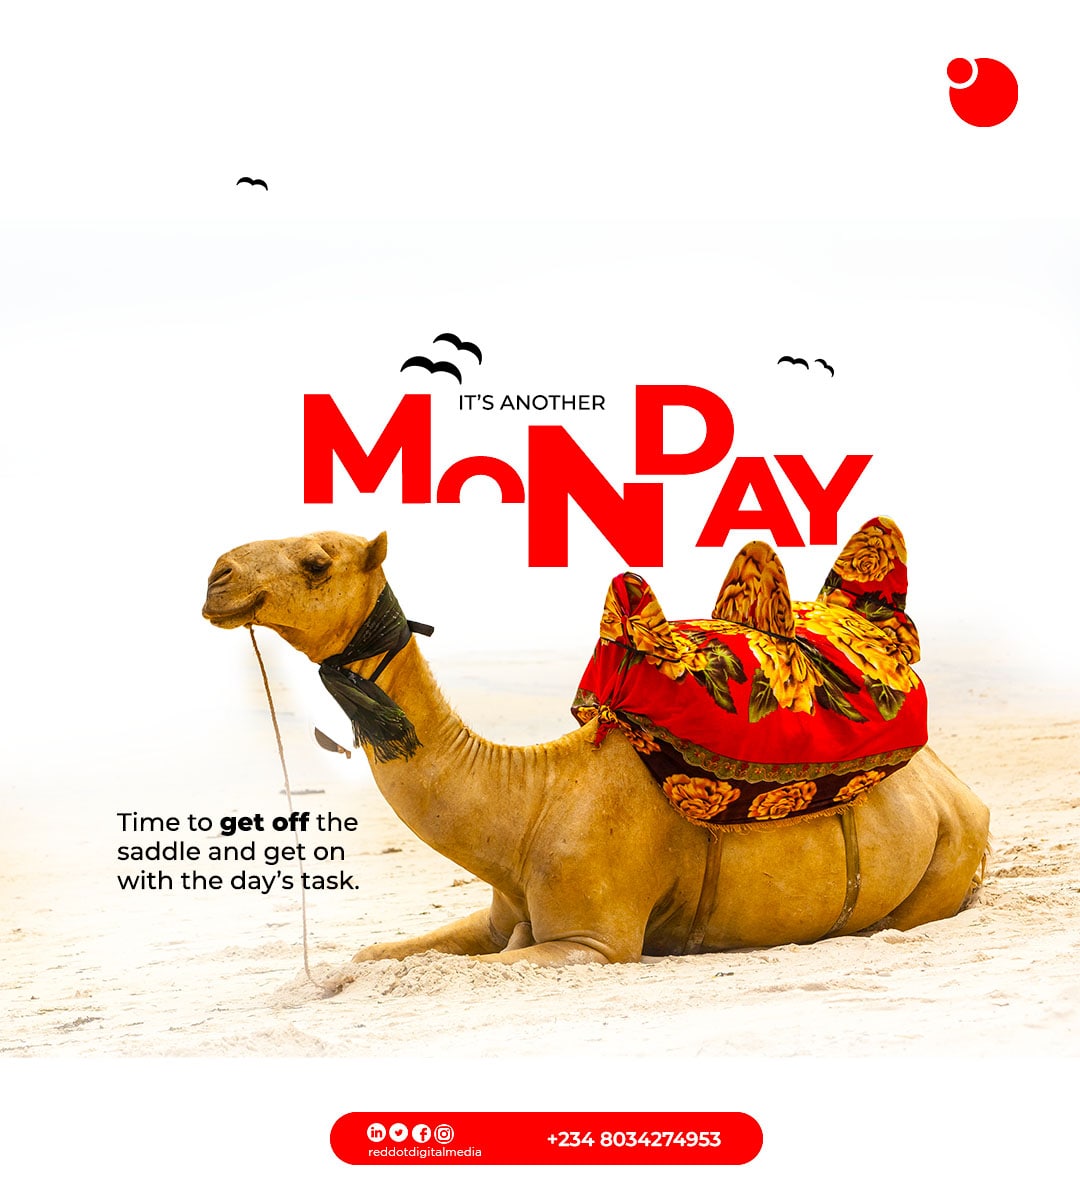 Get off your Saddle ... and move on with the TASK of the day. The approach may be different but the Goal has to always be the same. It's a Monday, go smash it. #monday #riverstate #Odumodu #mondaymotivations💪 #quotes #reddotdigitalmedia #design #logodesigns #buga #boyalone